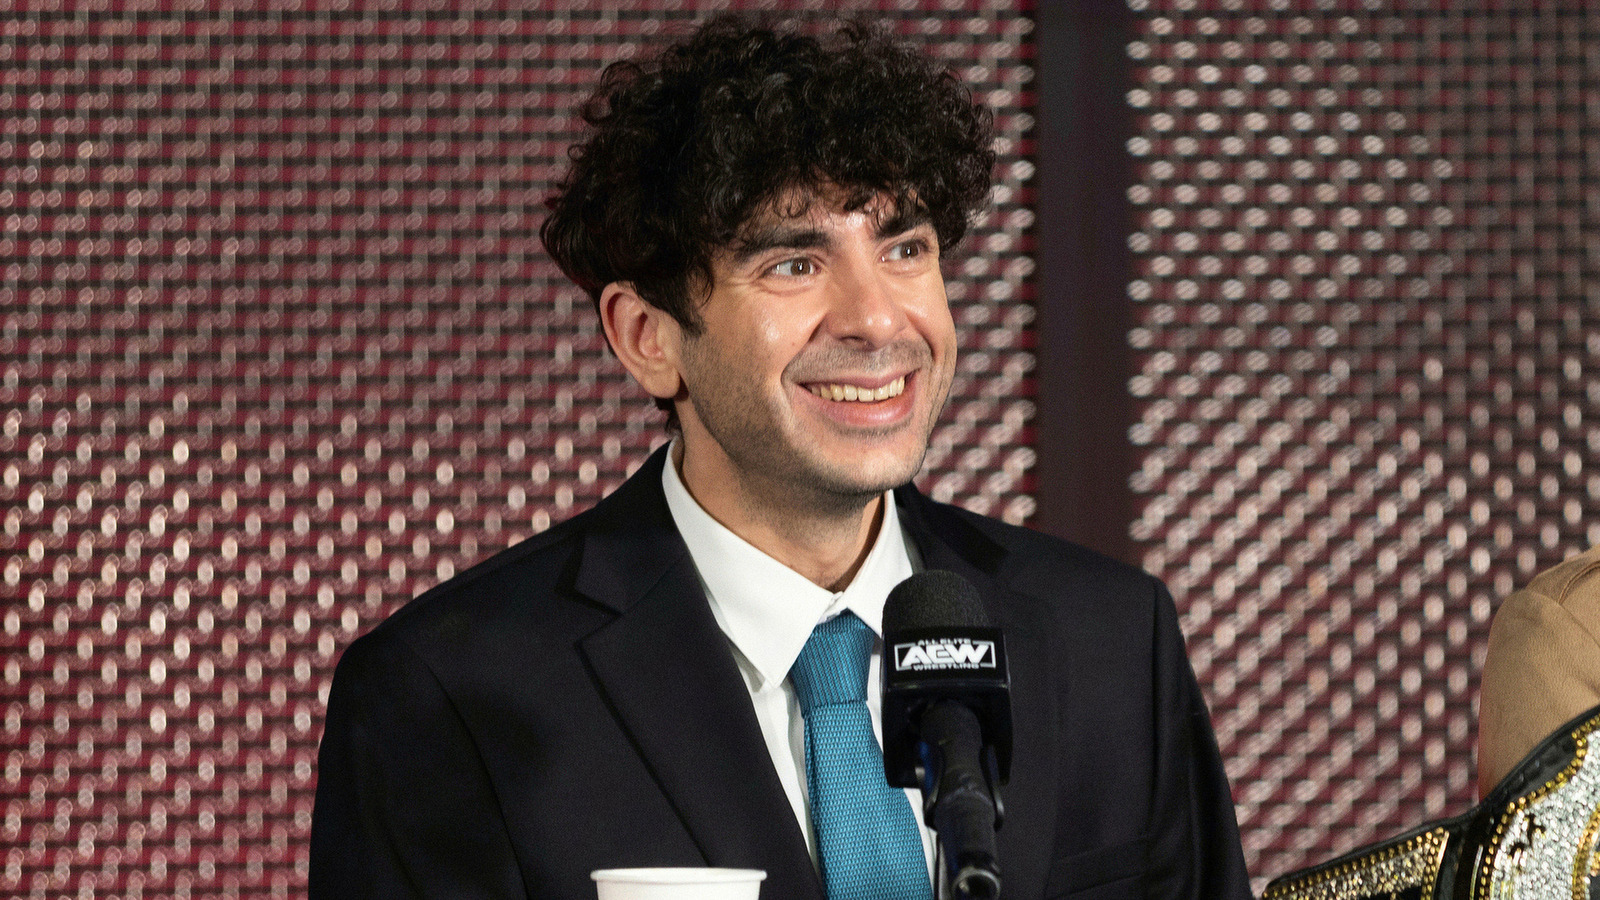 Tony Khan Will Make An Important Announcement On AEW Dynamite On November 1